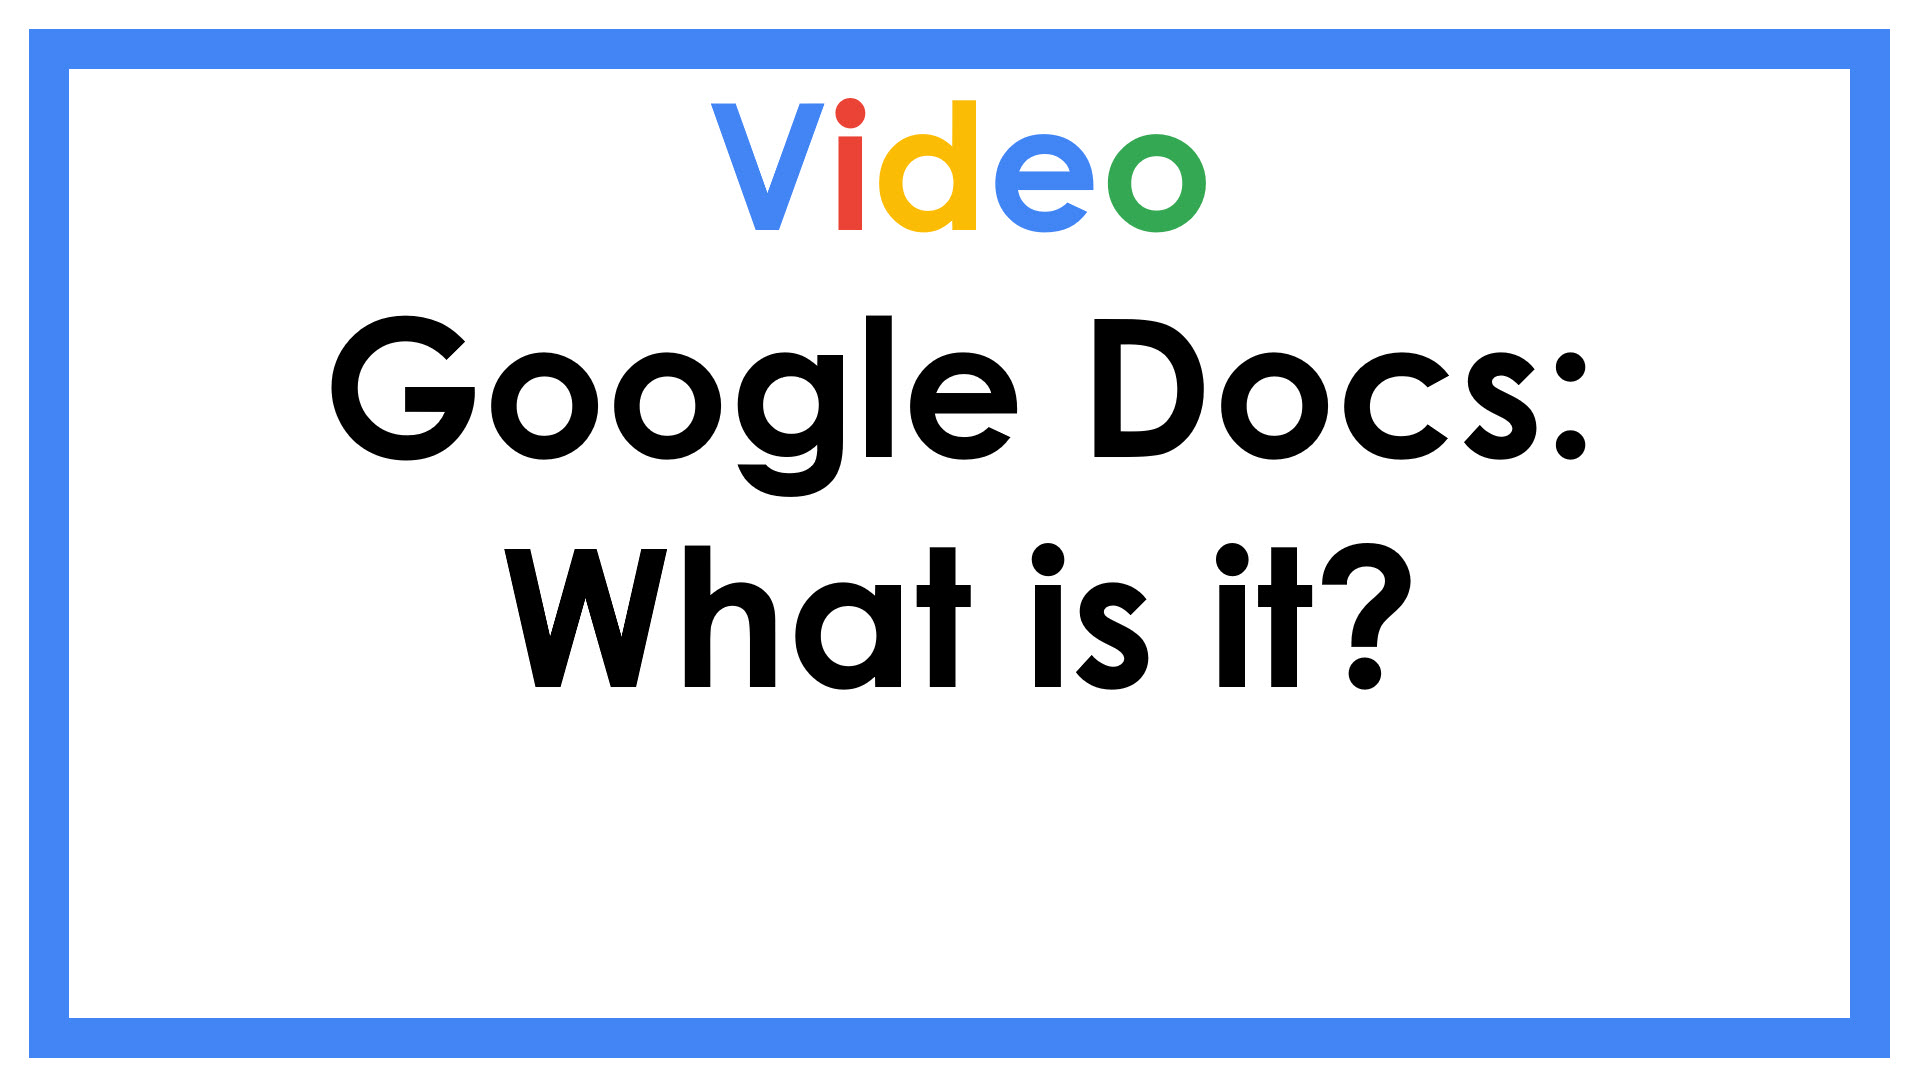 Video Google Docs: What is It?